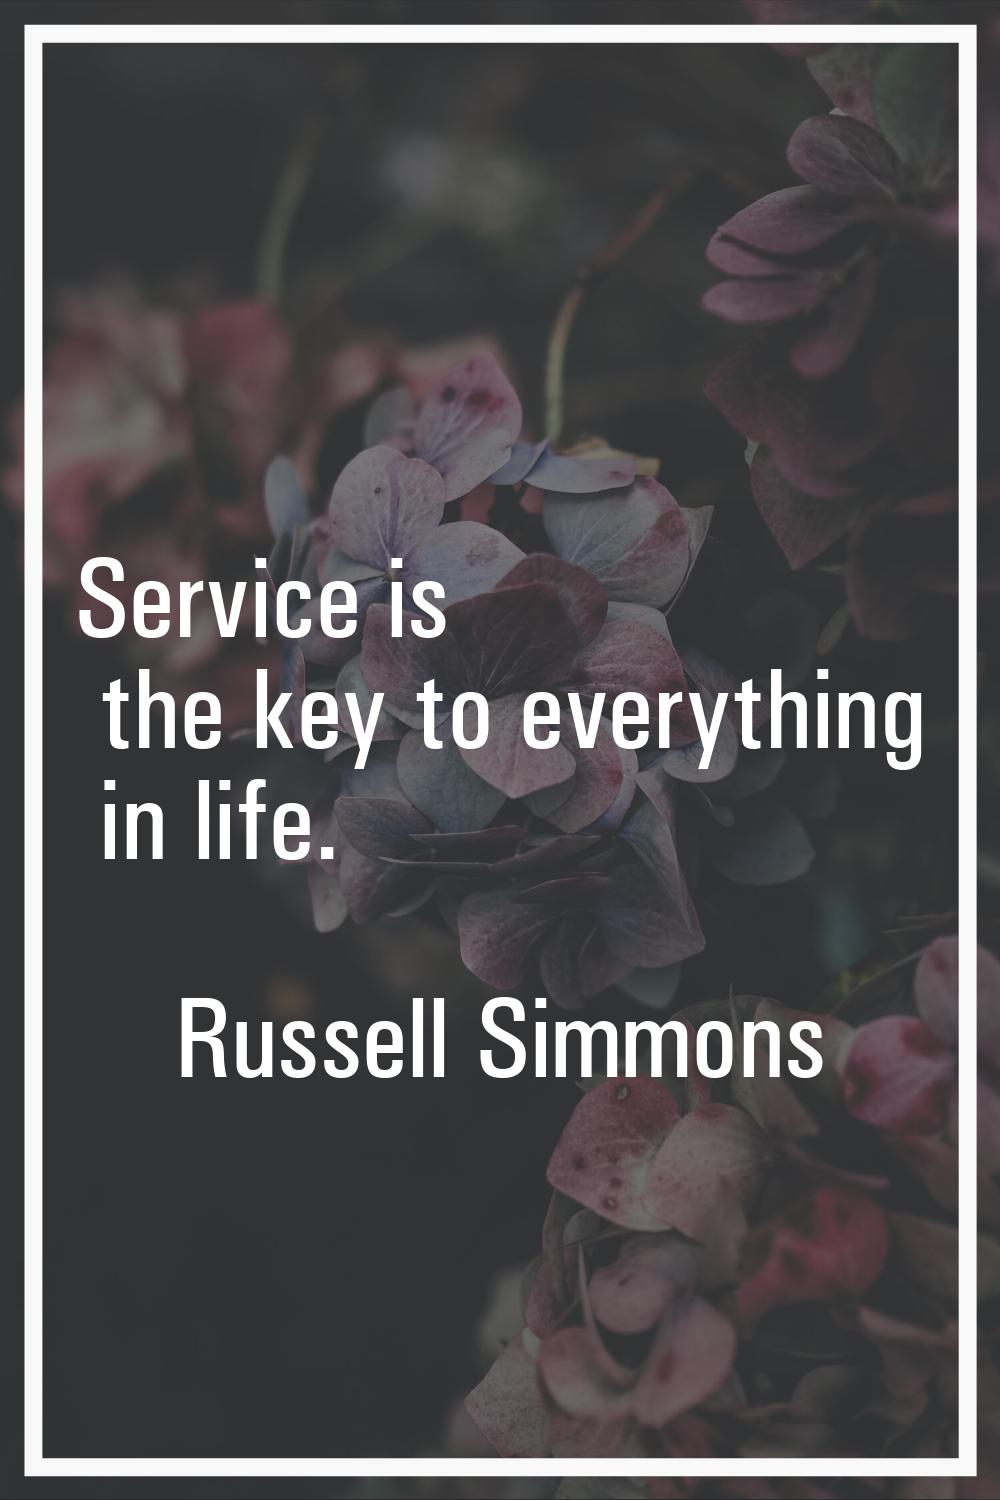 Service is the key to everything in life.